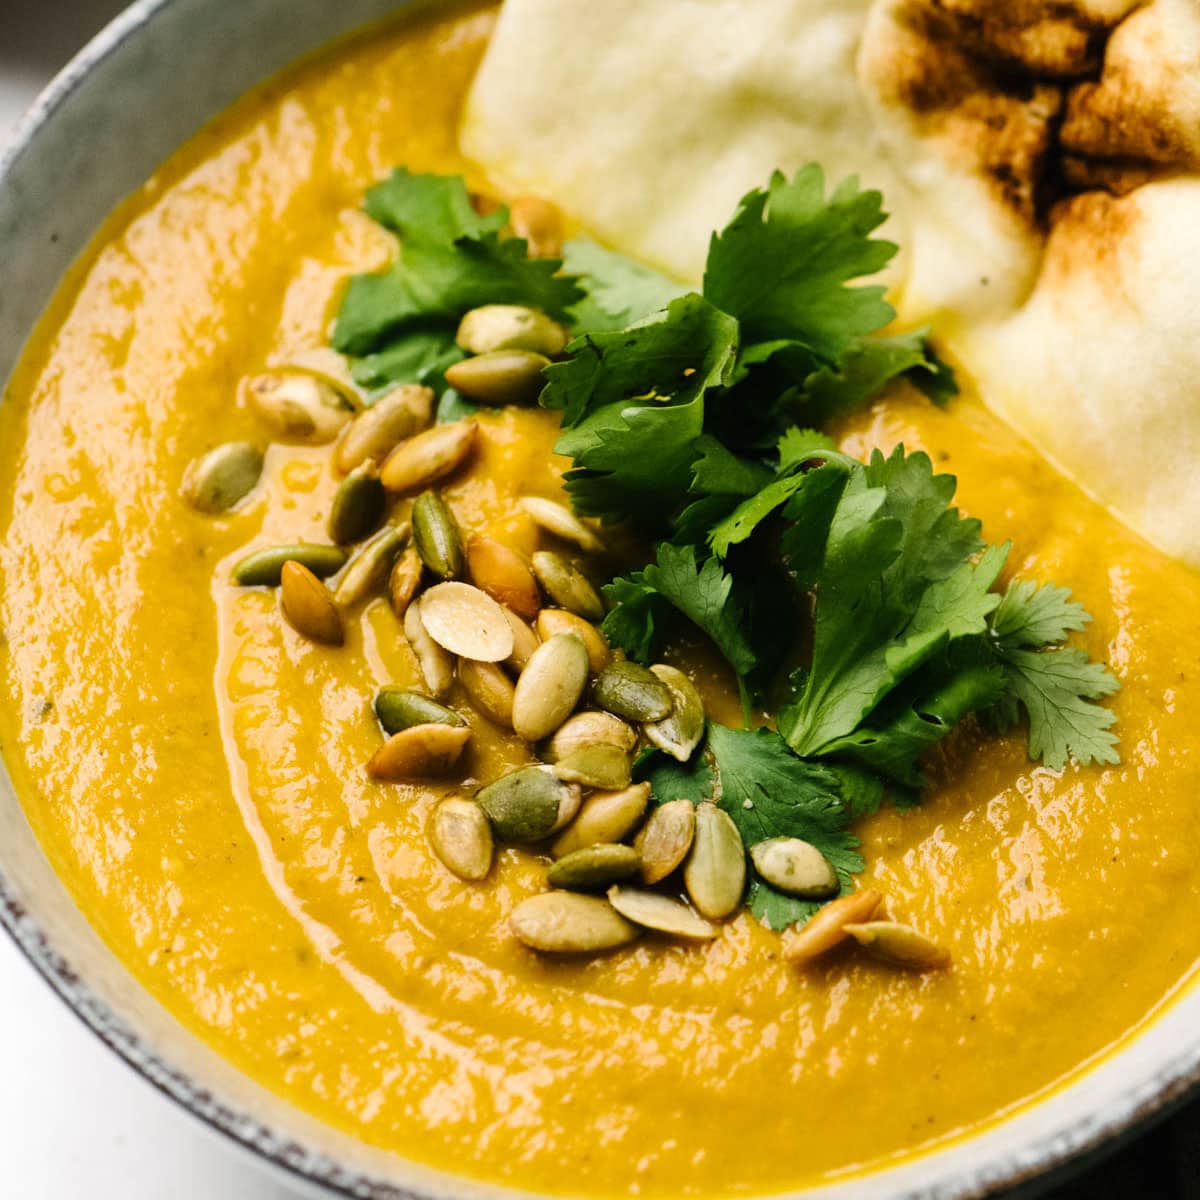 https://oursaltykitchen.com/wp-content/uploads/2022/11/pumpkin-curry-soup-featured-image-1.jpg